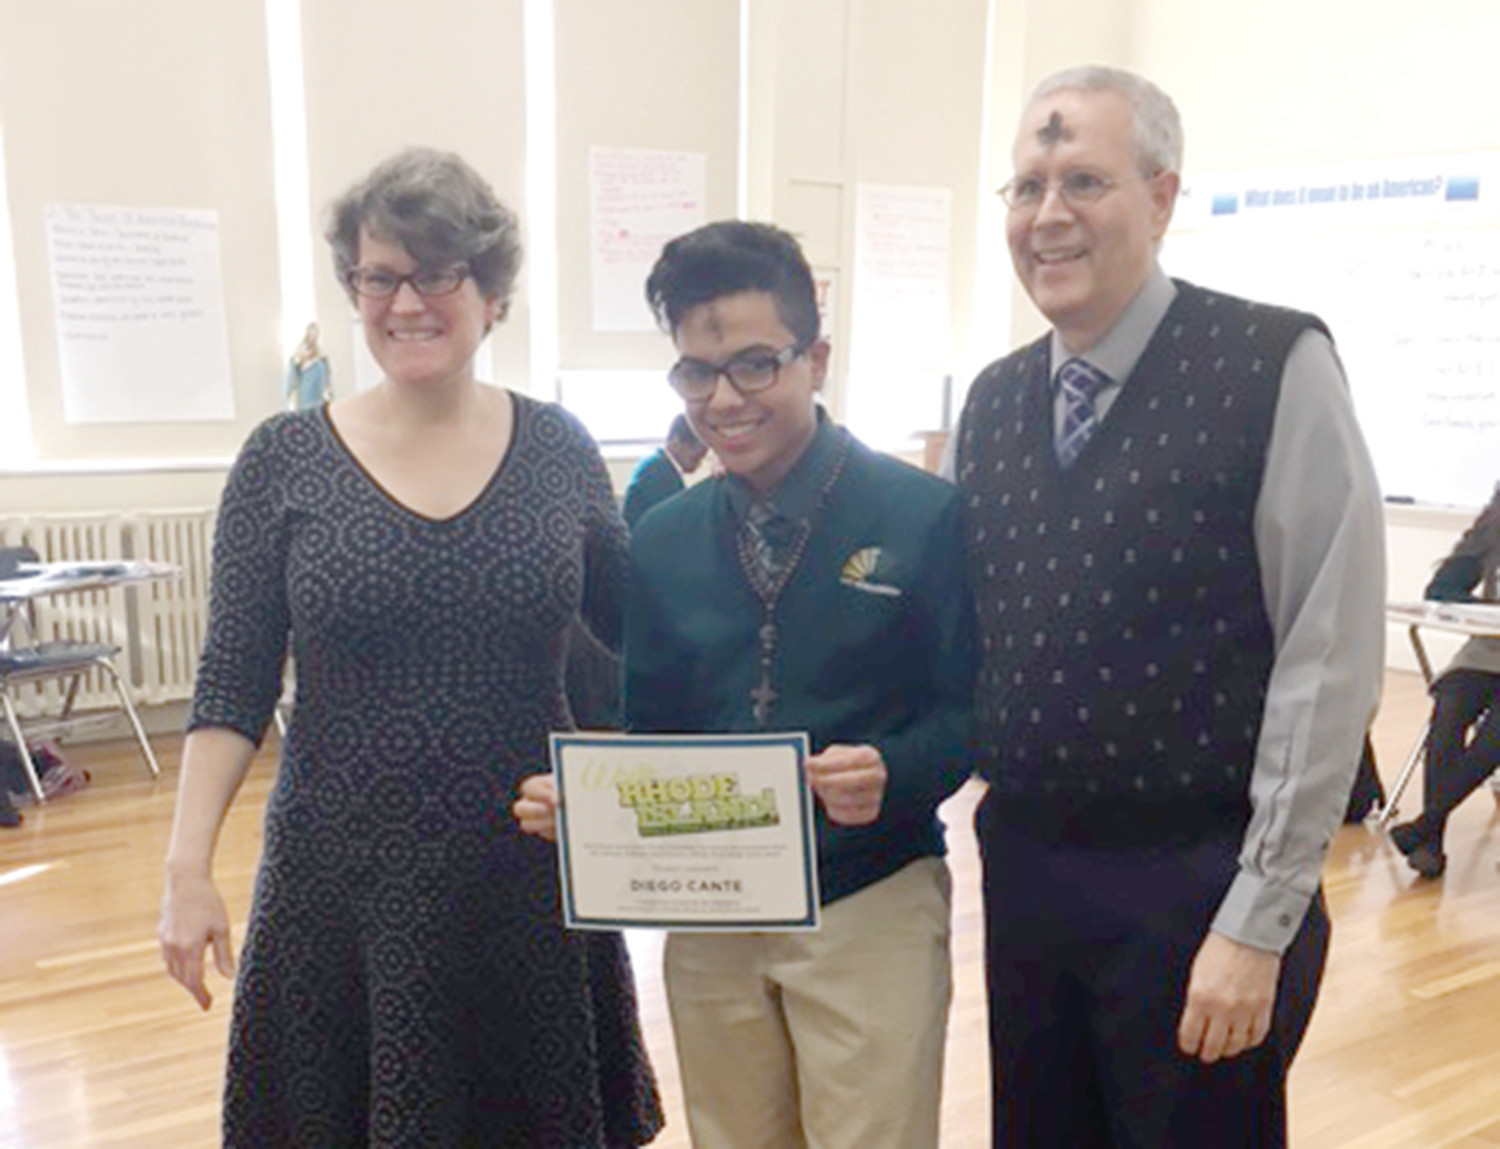 Pictured, Diego Cante with his teacher Brett Summers and Principal Bruce Daigle.